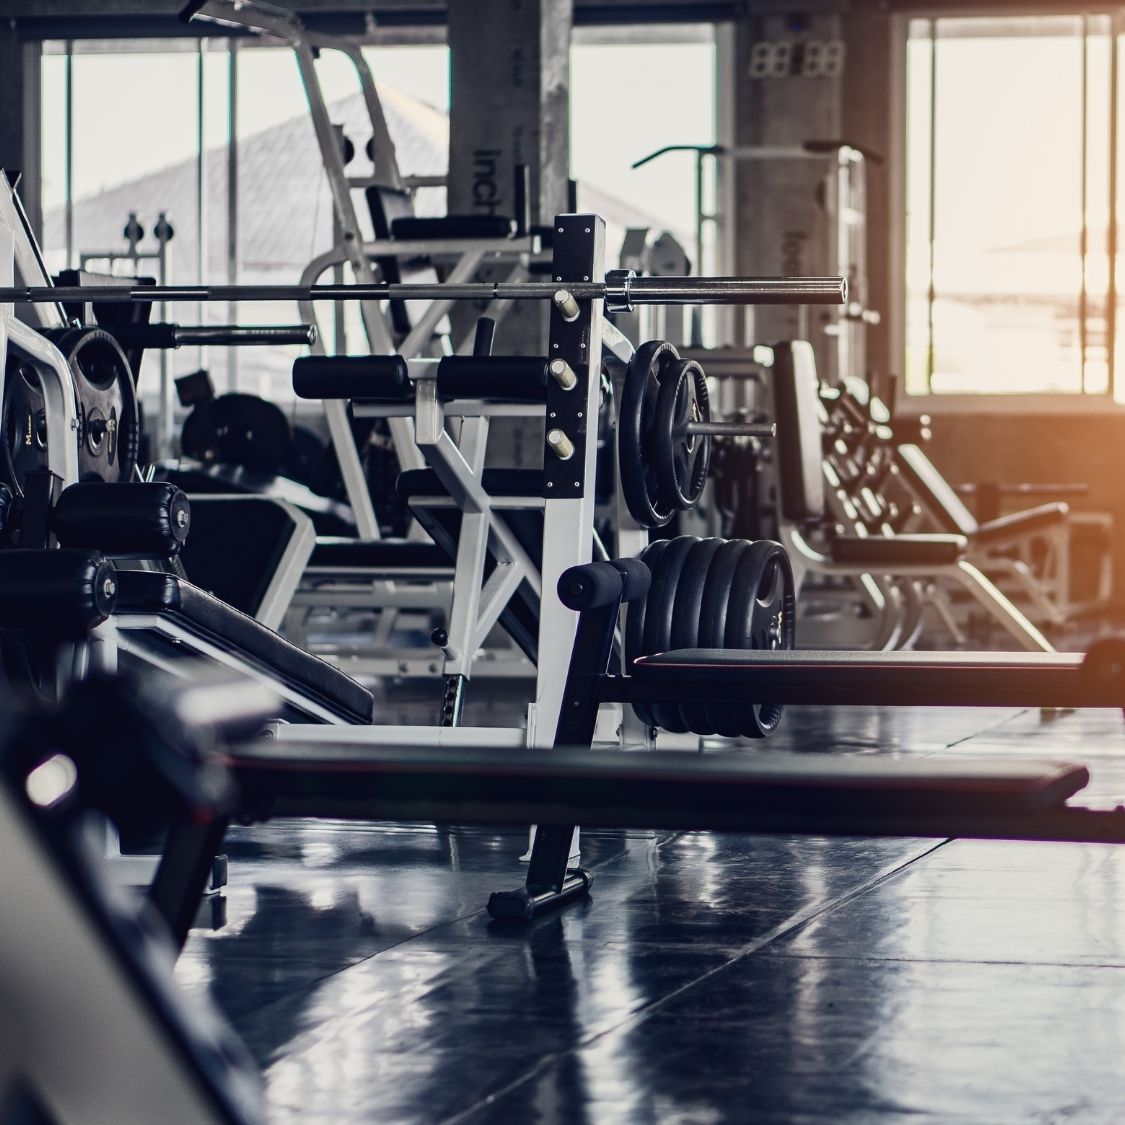 The Easiest Ways To Lose Weight at the Gym